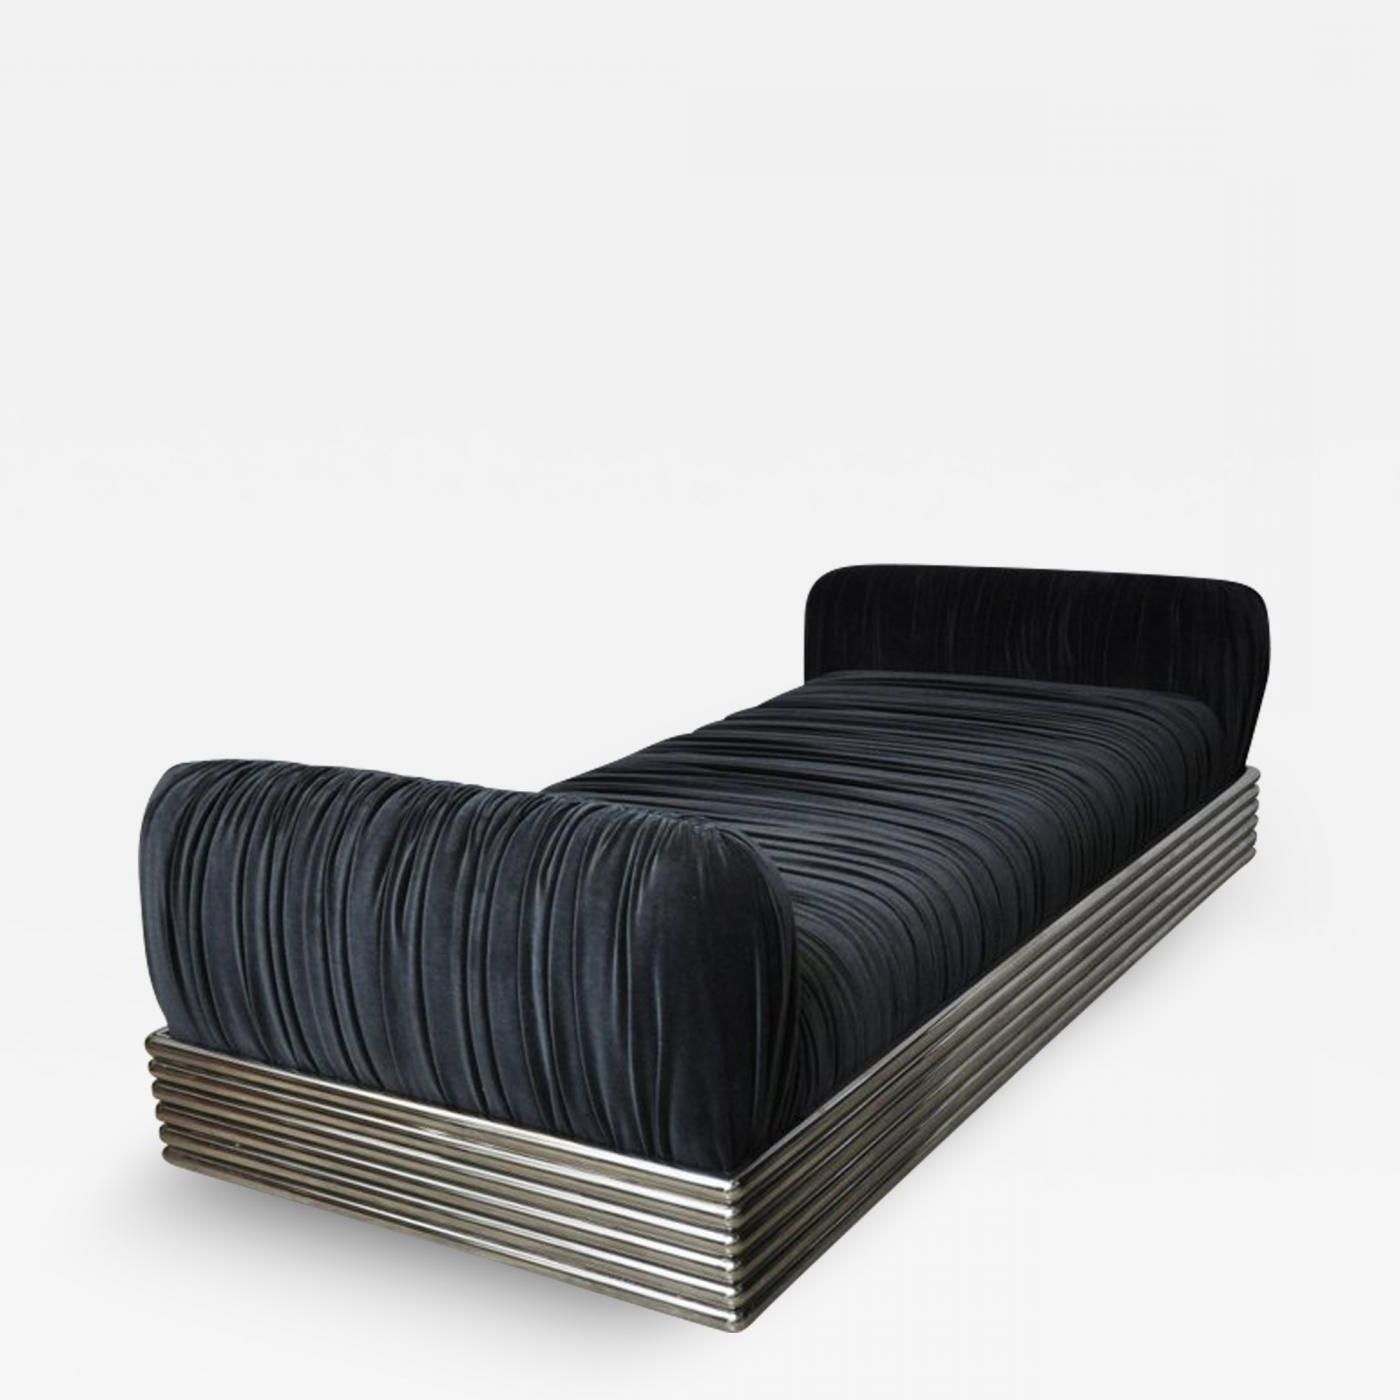 Brueton – Brueton Radiator Chaise Longue Daybed For Fashionable Daybed Chaises (View 13 of 15)